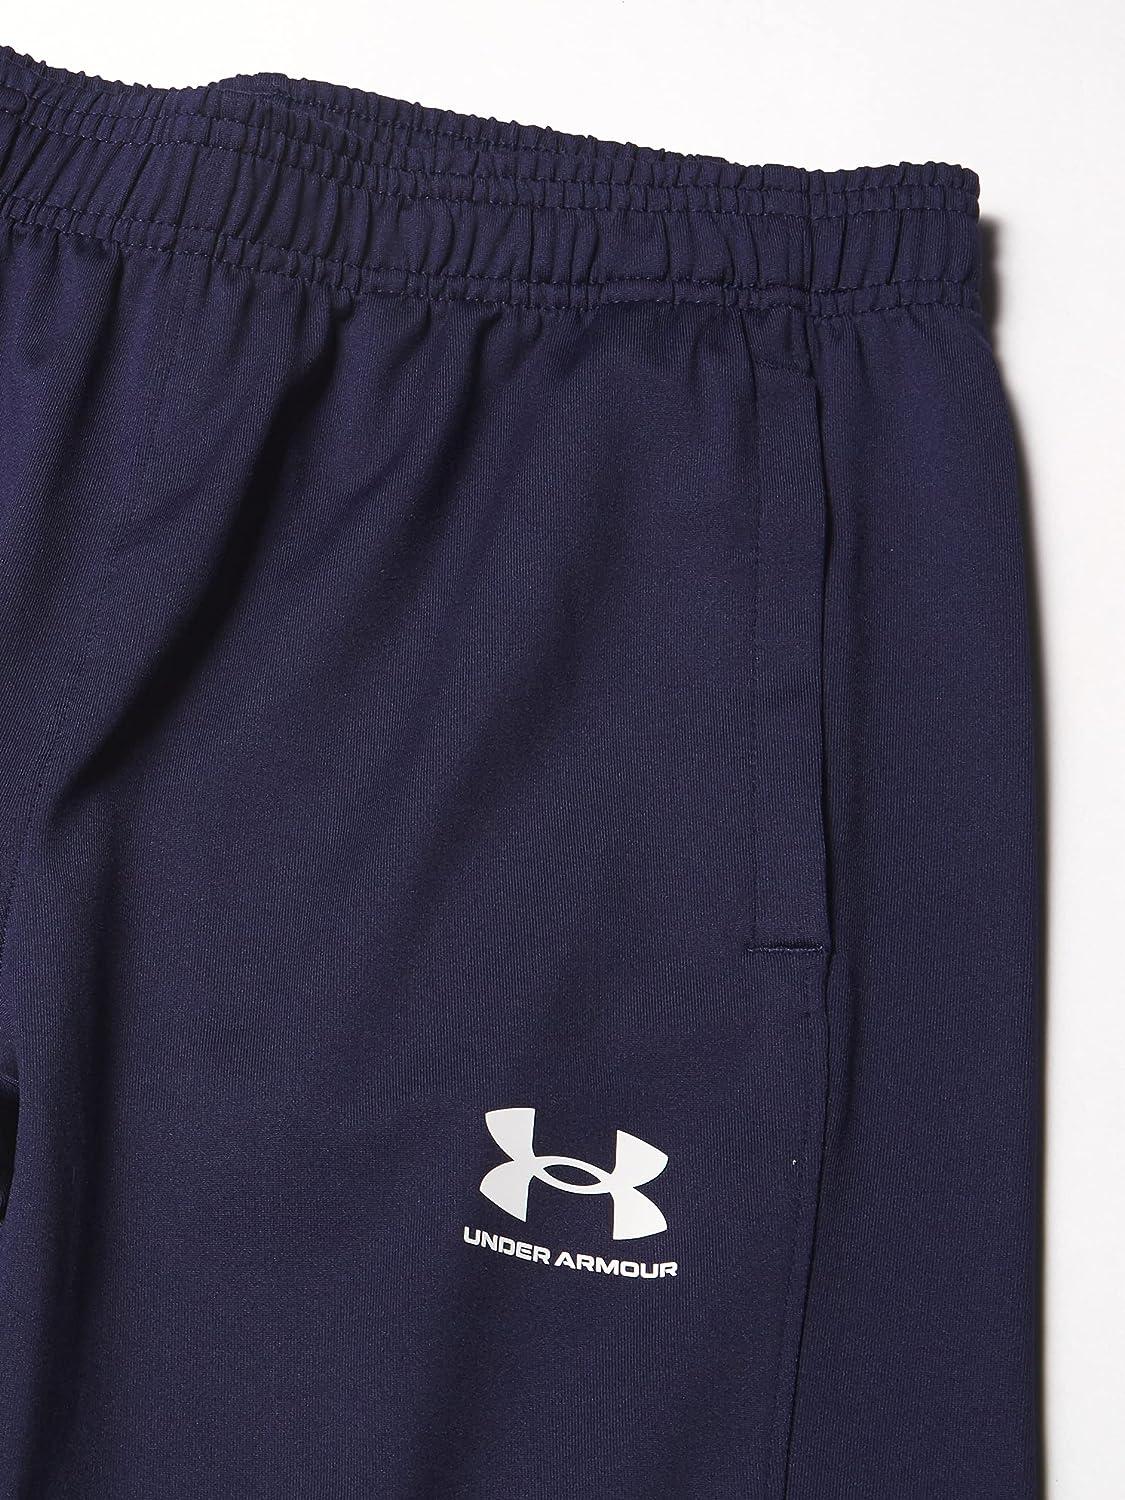 Under Armour Boys' Challenger Training Pants Midnight Navy (410)/White Large